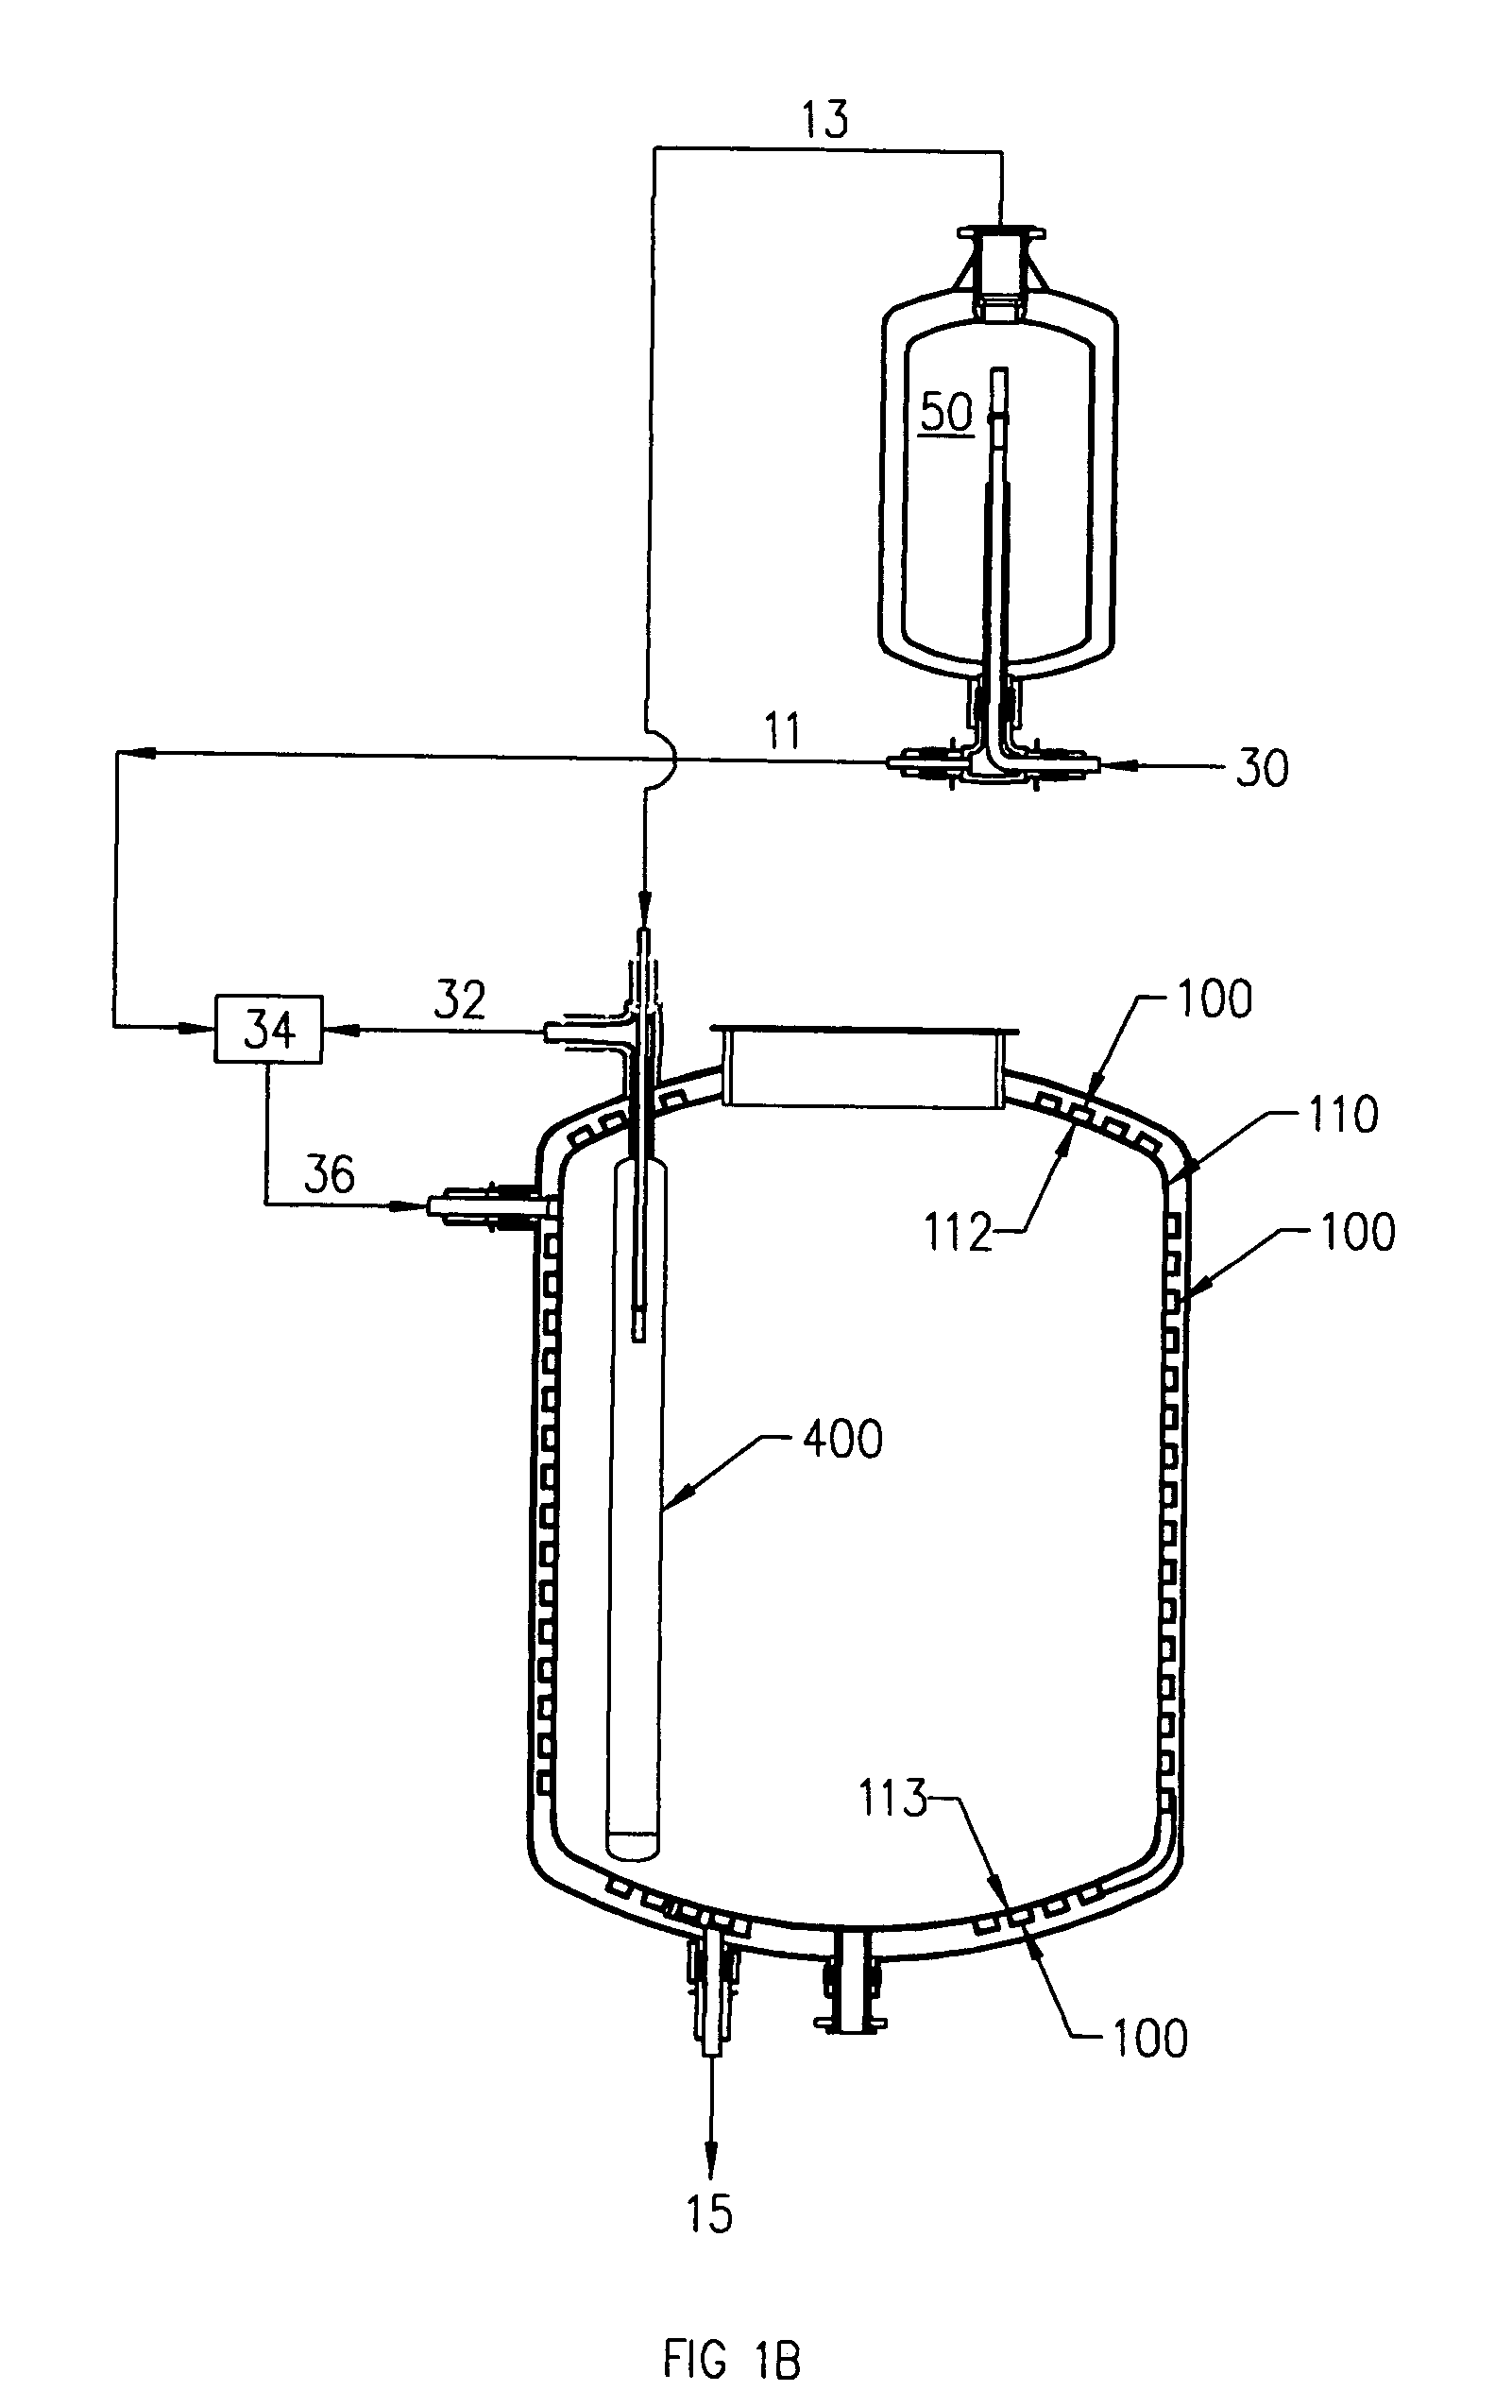 Temperature controlled reaction vessel